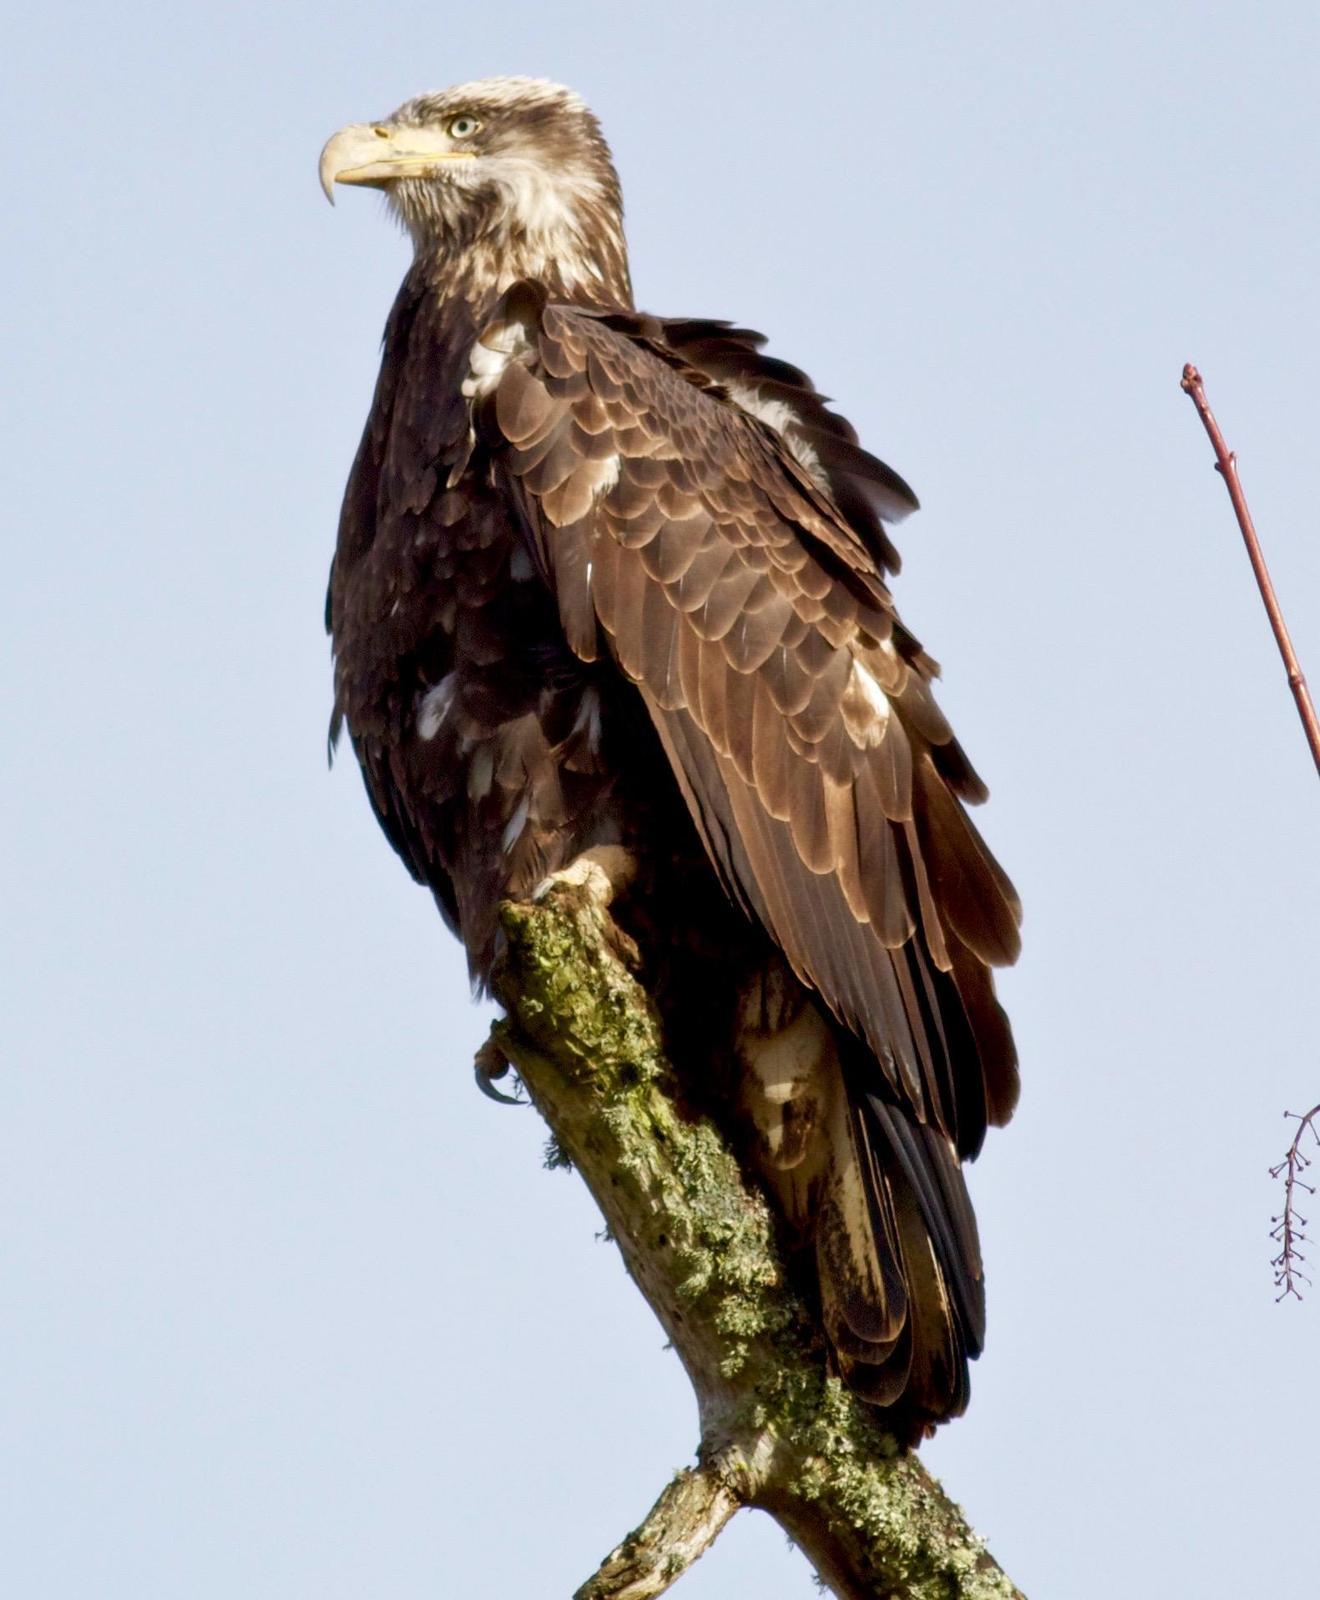 Bald Eagle Photo by Kathryn Keith